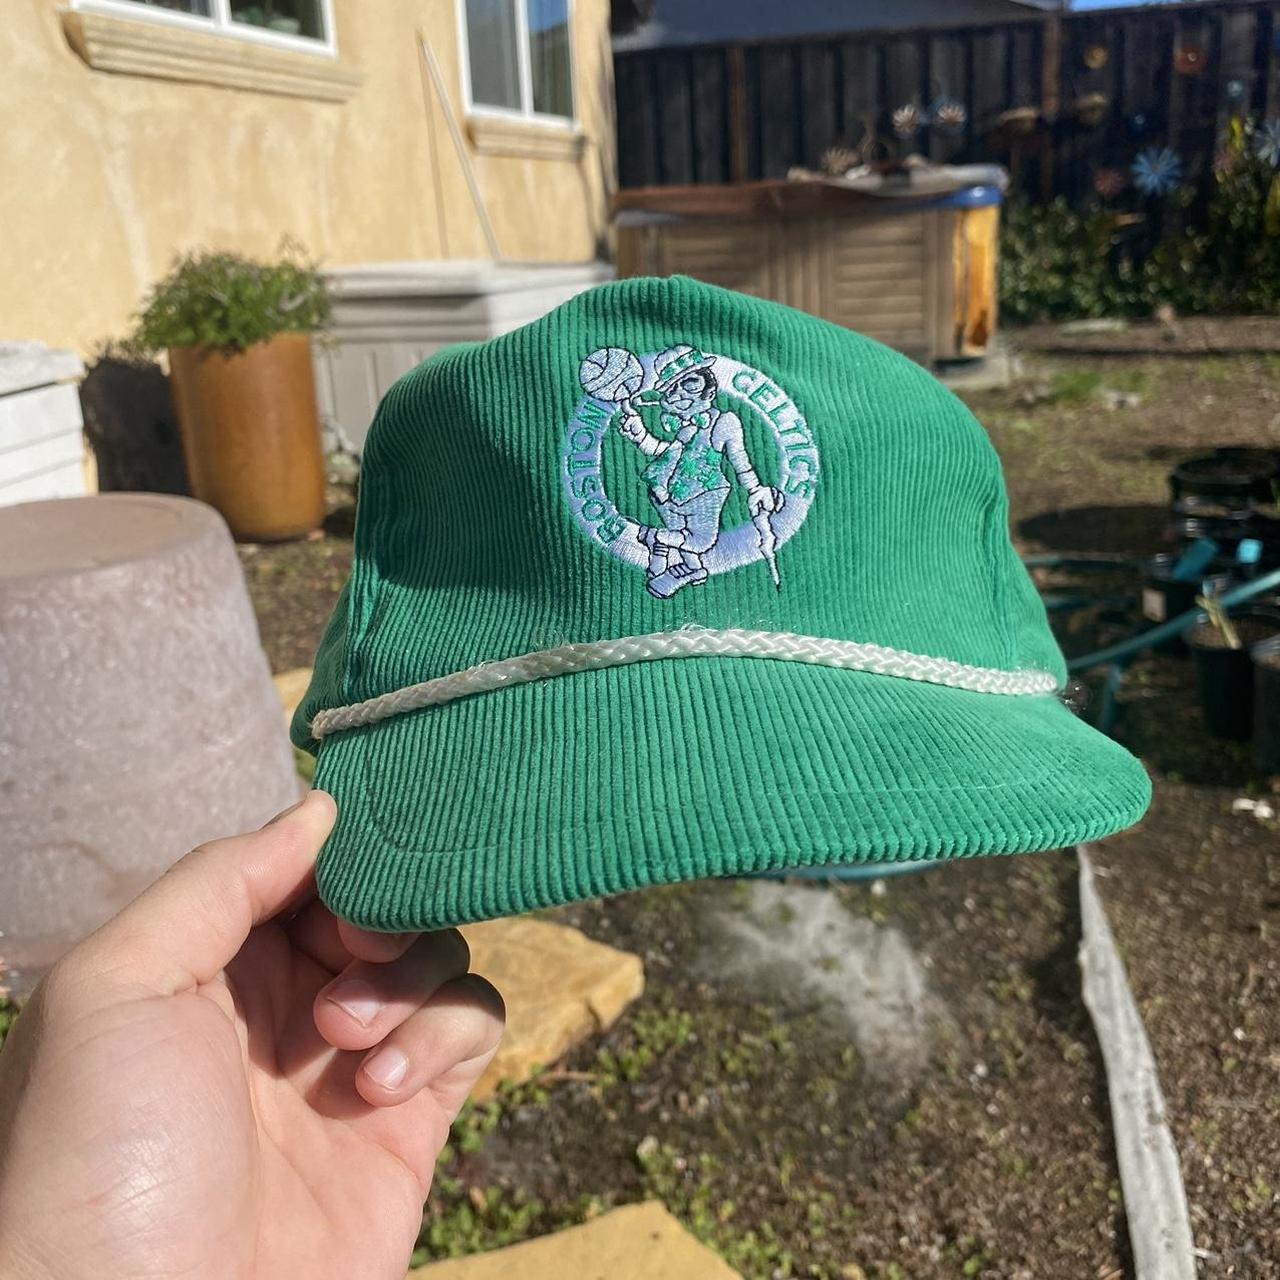 NBA Men's Green and White Hat